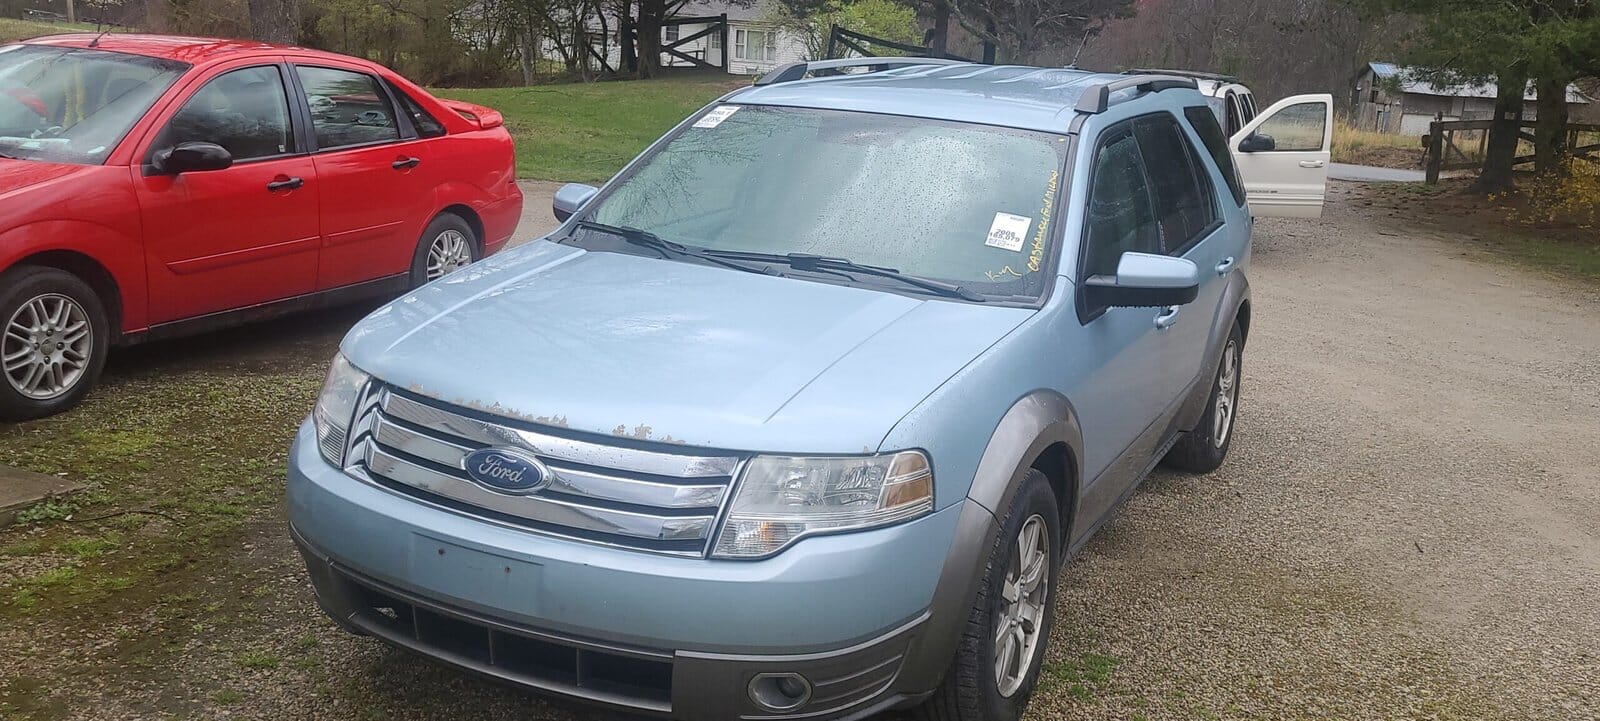 Read more about the article ***SOLD***2008 Taurus X SEL***SOLD***